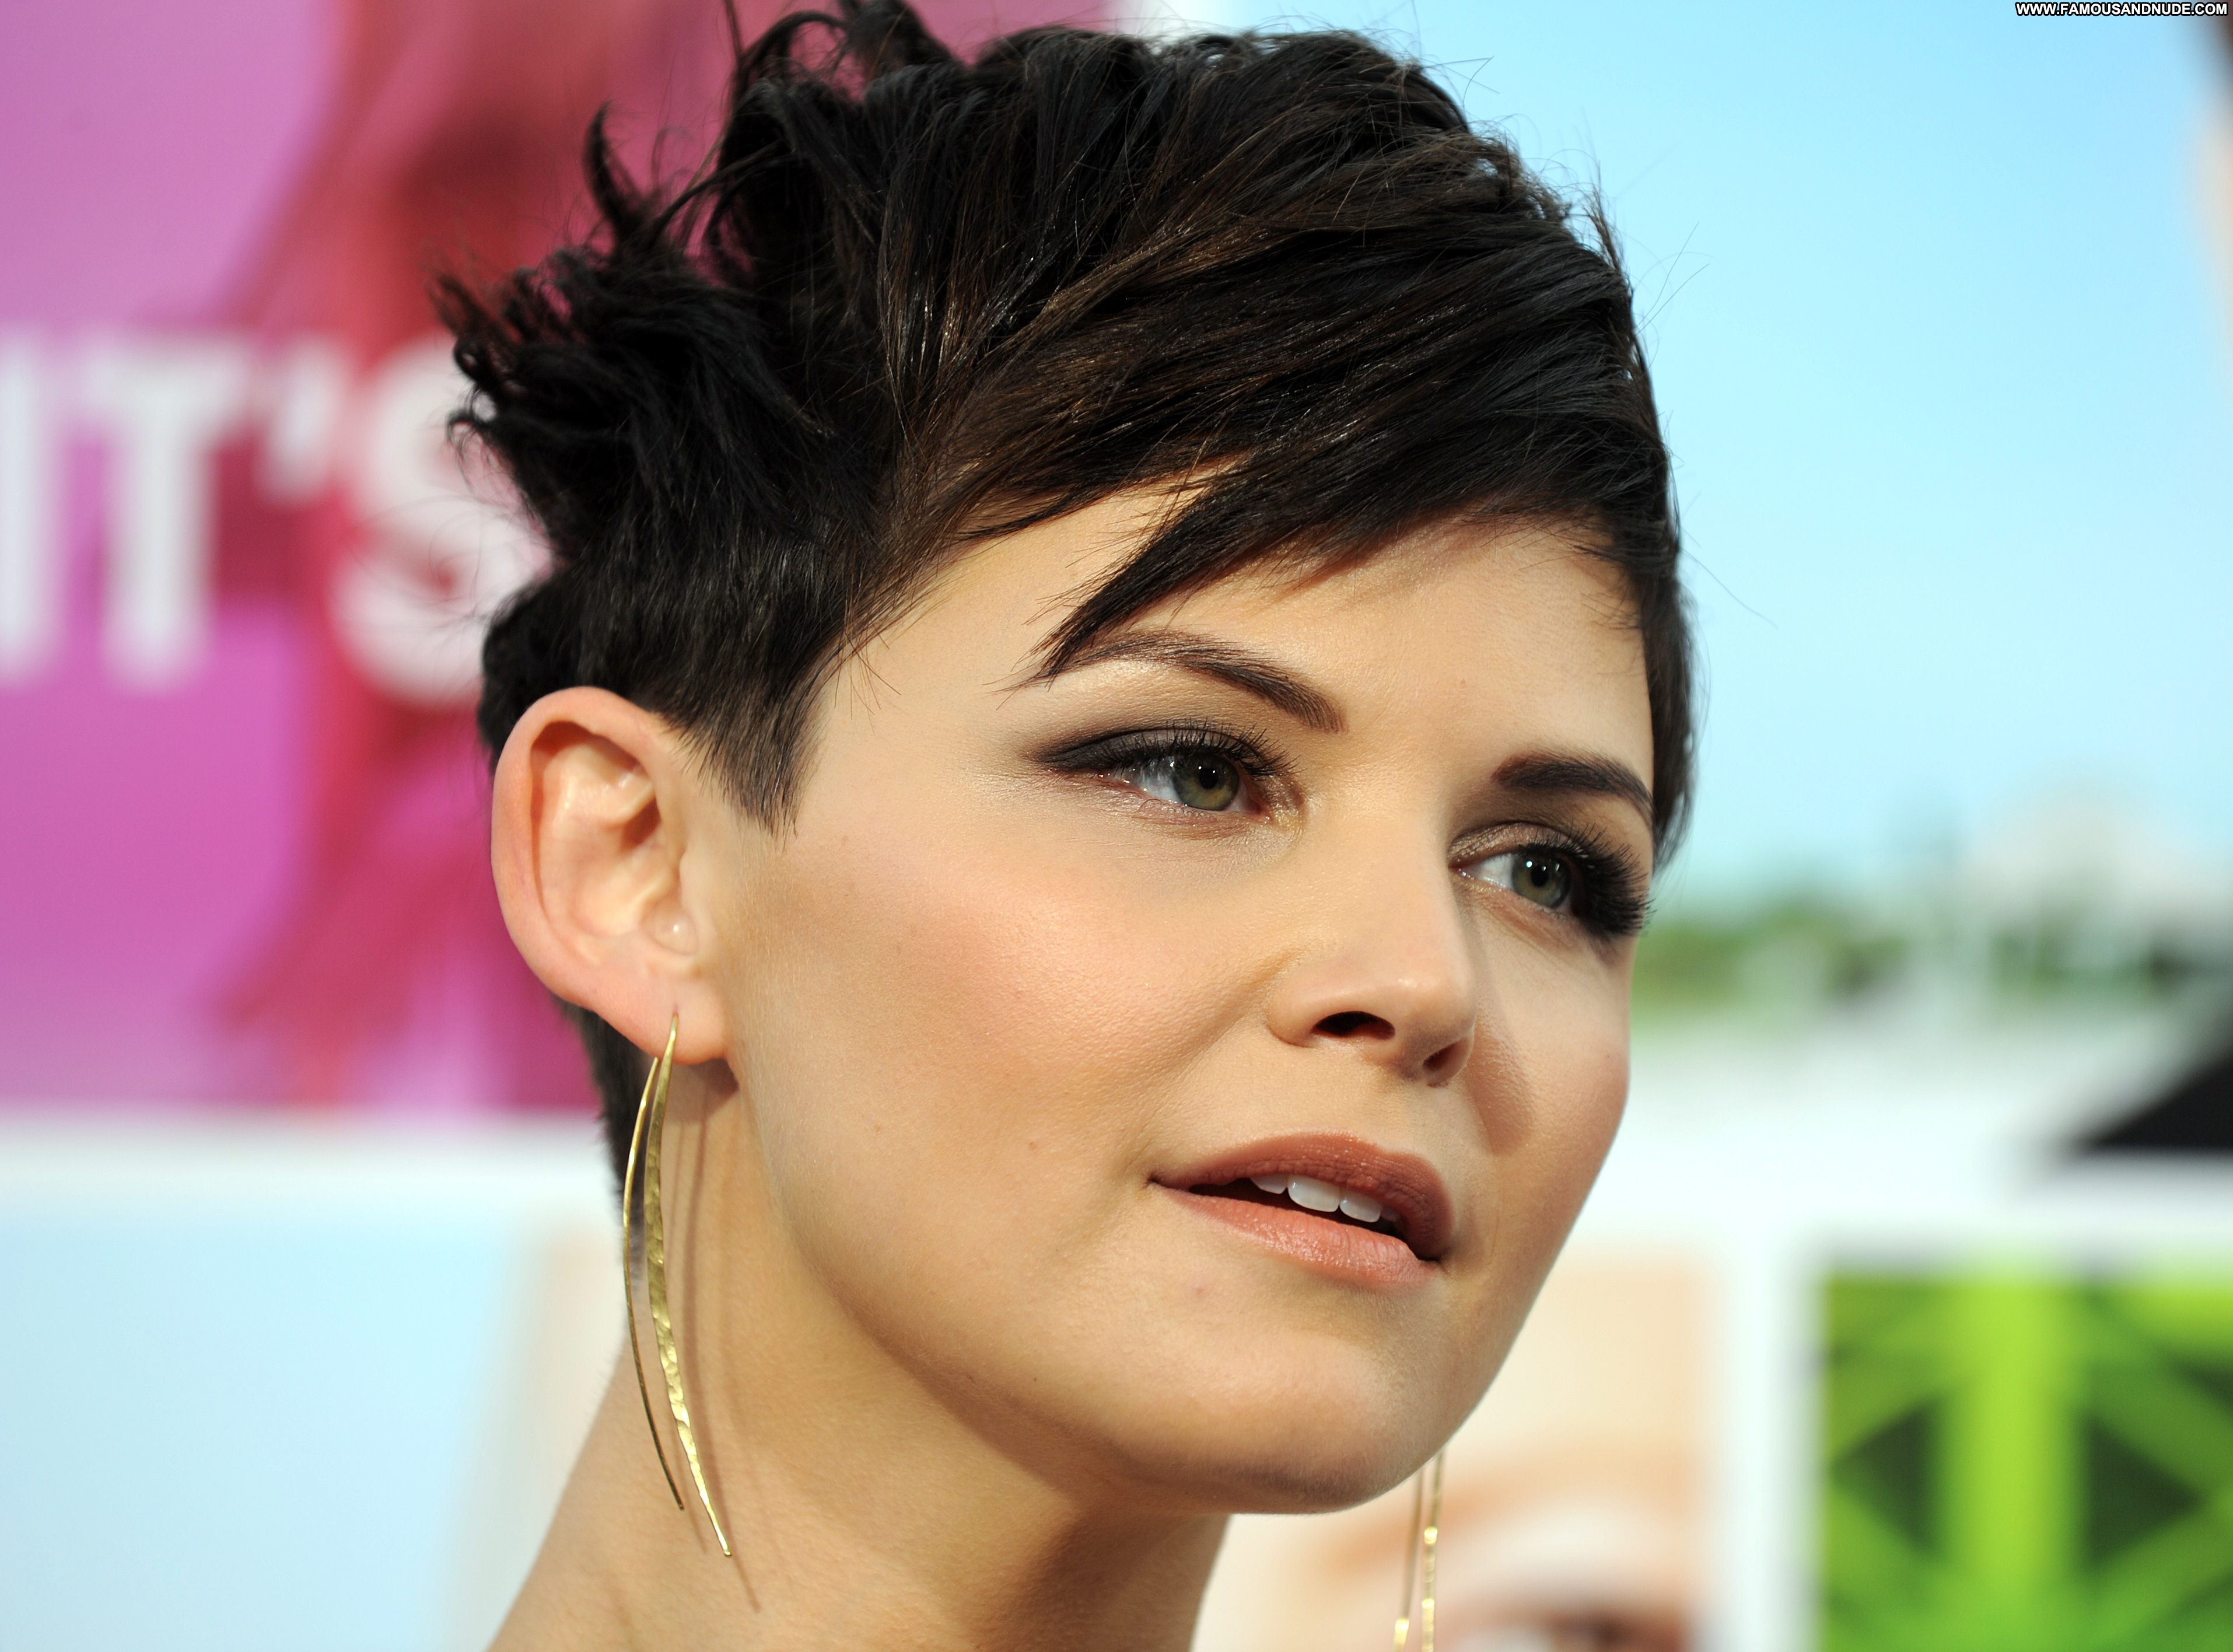 Full Frontal Ginnifer Goodwin Sensual Sexy Sultry Hot Celebrity Cute Stunni...